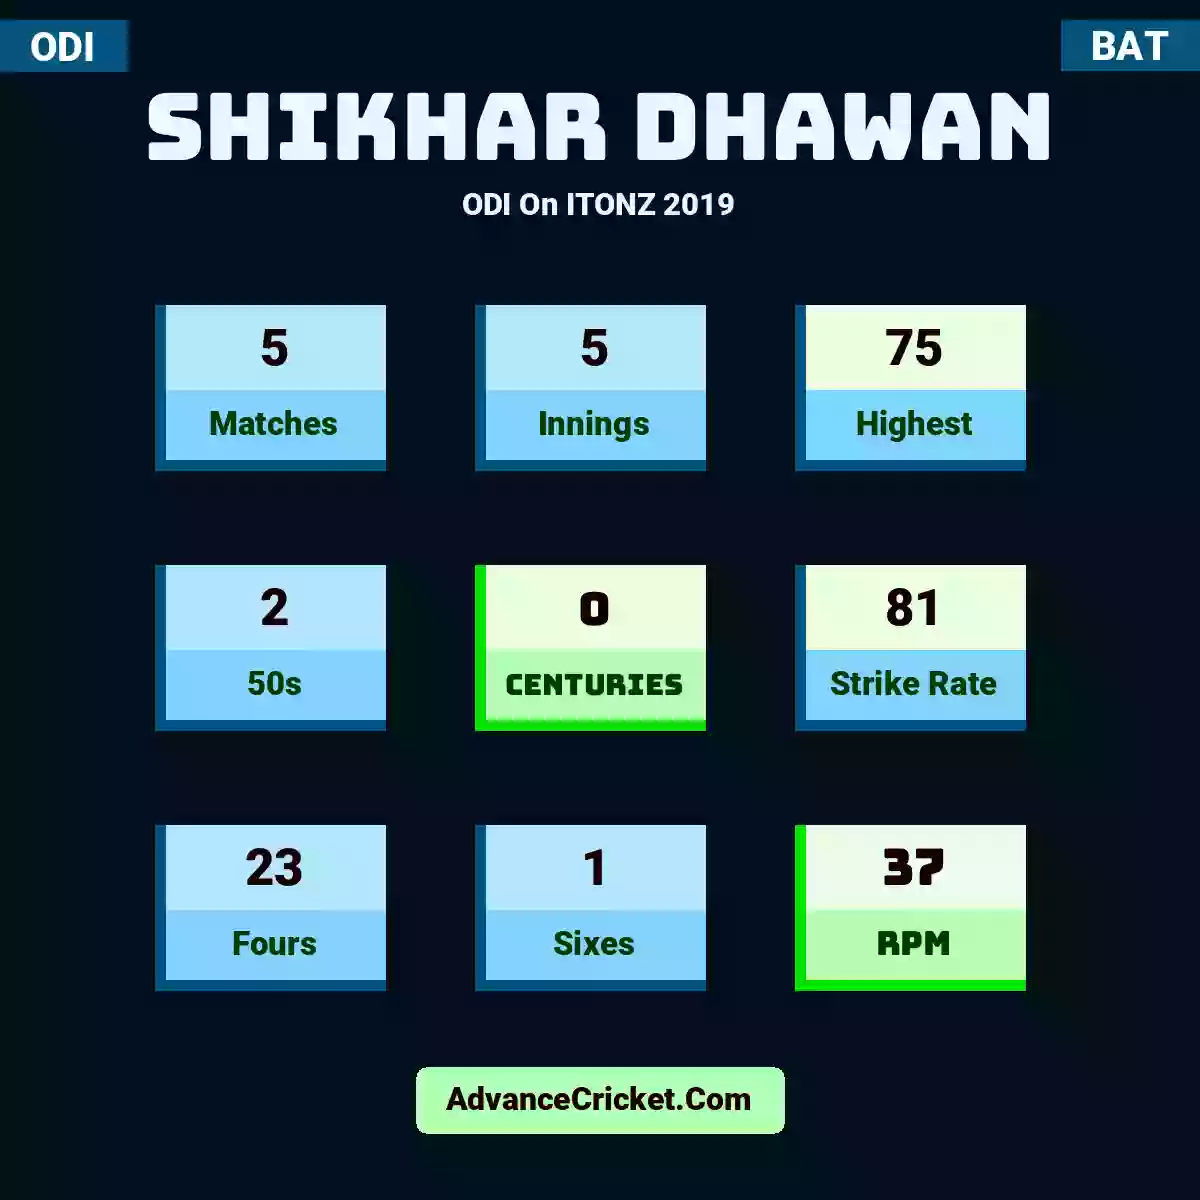 Shikhar Dhawan ODI  On ITONZ 2019, Shikhar Dhawan played 5 matches, scored 75 runs as highest, 2 half-centuries, and 0 centuries, with a strike rate of 81. S.Dhawan hit 23 fours and 1 sixes, with an RPM of 37.